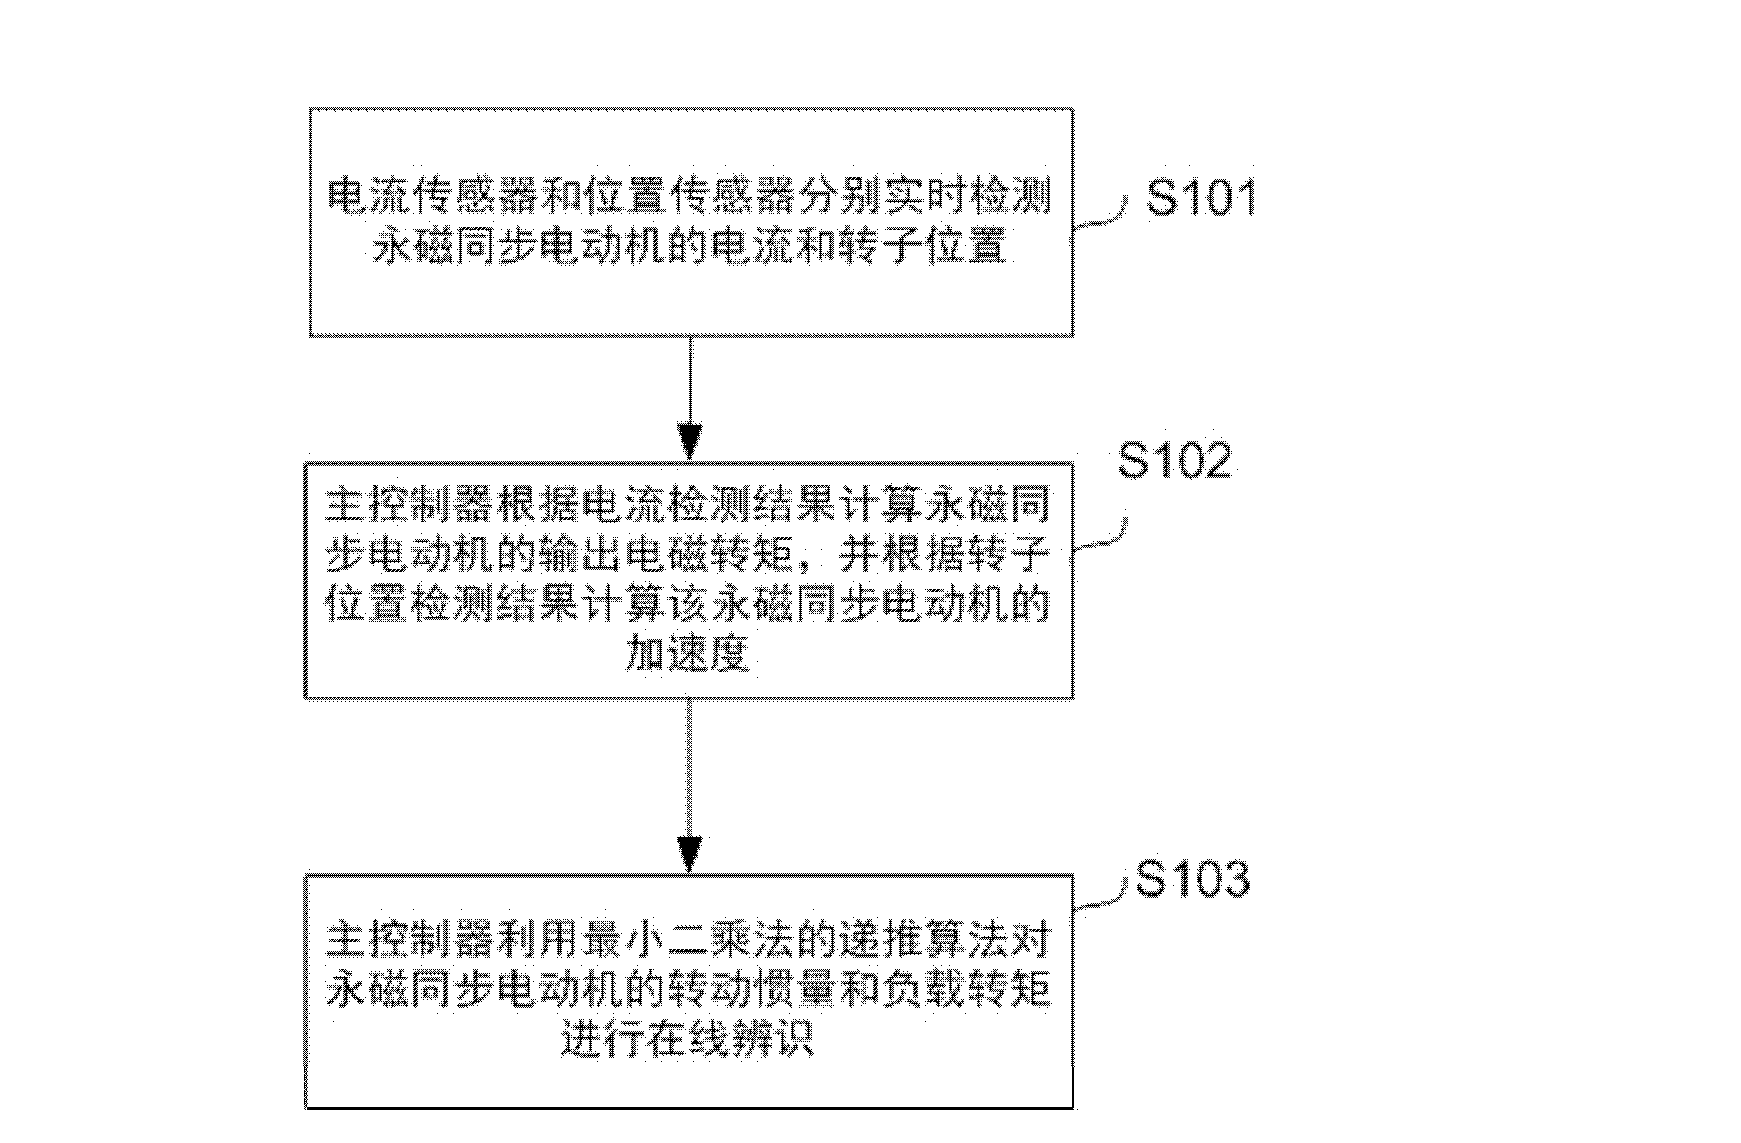 Method for identifying permanent magnetic synchronous motor load parameters